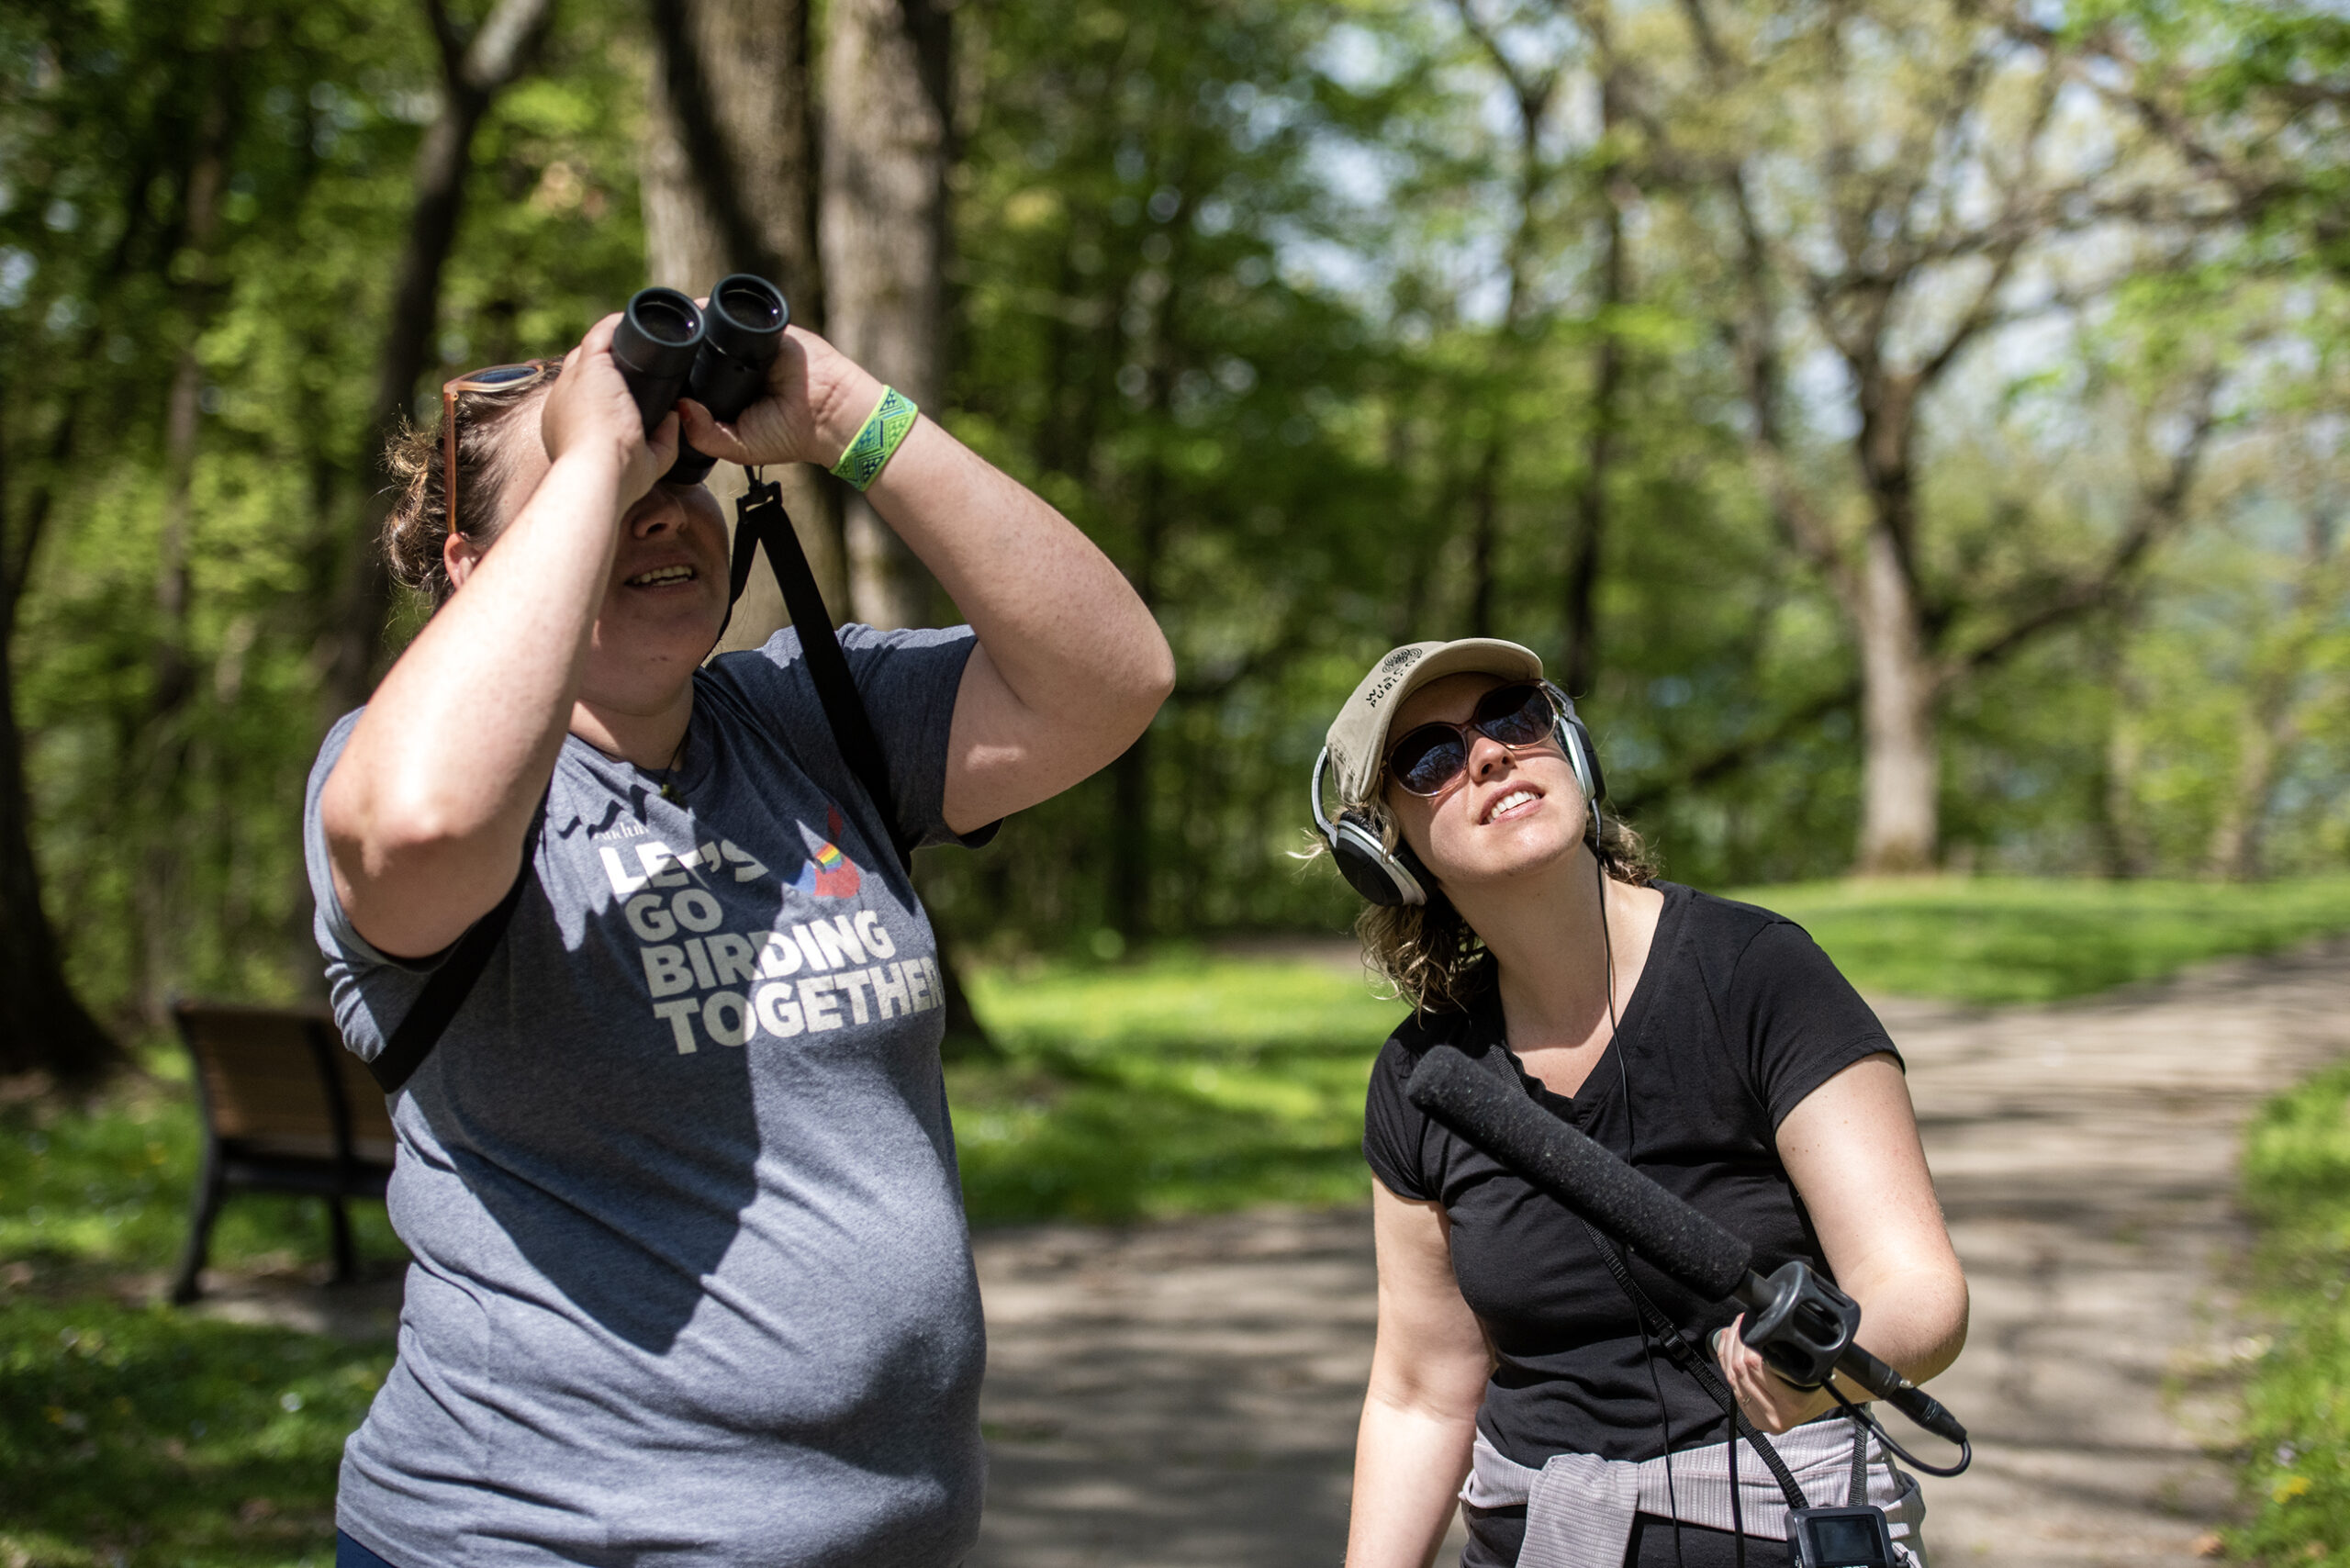 Kari Hagenow, left, a land steward and conservation project manager at The Nature Conservancy in Wisconsin, explains the birds she sees as Wisconsin Public Radio reporter Bridgit Bowden, right, records audio Wednesday, May 10, 2023, at Wyalusing State Park in Bagley, Wis. (Angela Major/WPR)